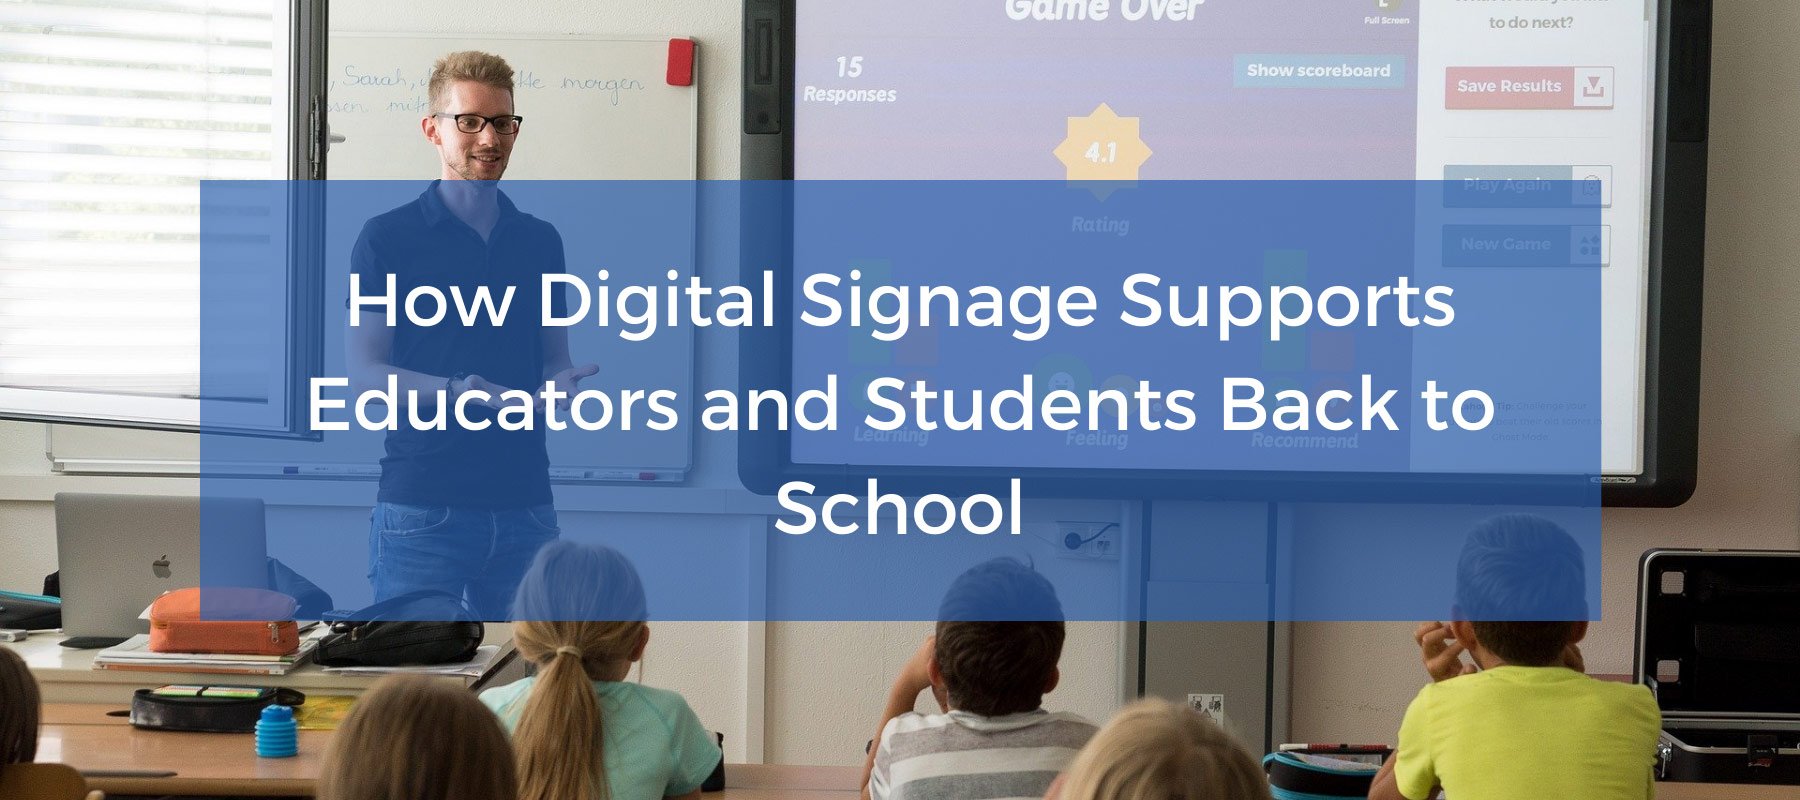 How Digital Signage Supports Educators and Students Back to School